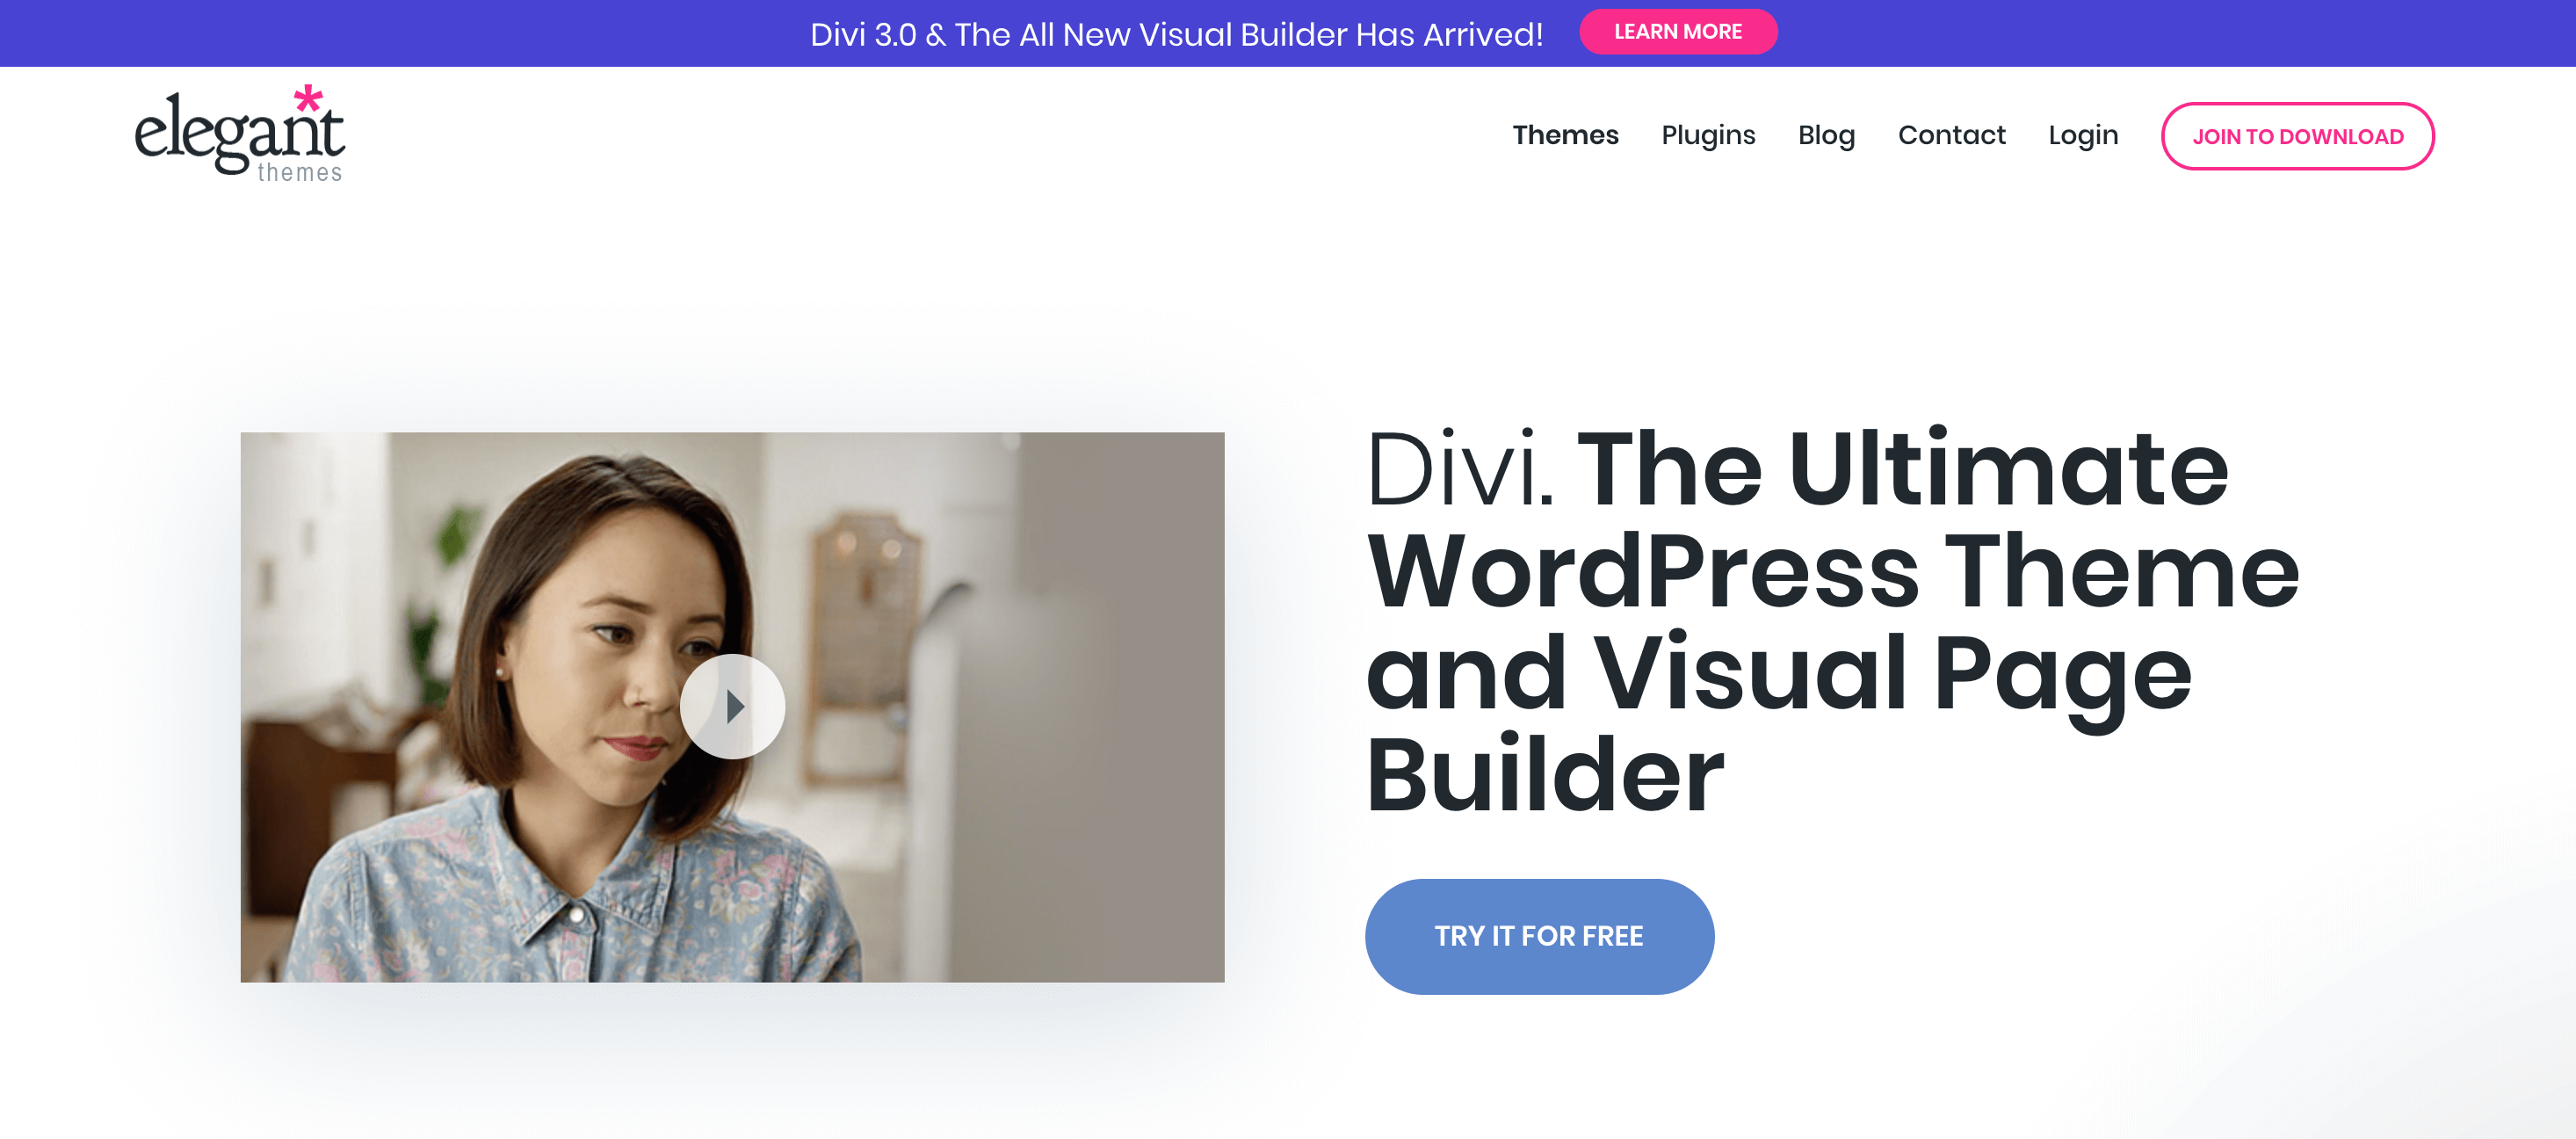 The website for the Divi builder.